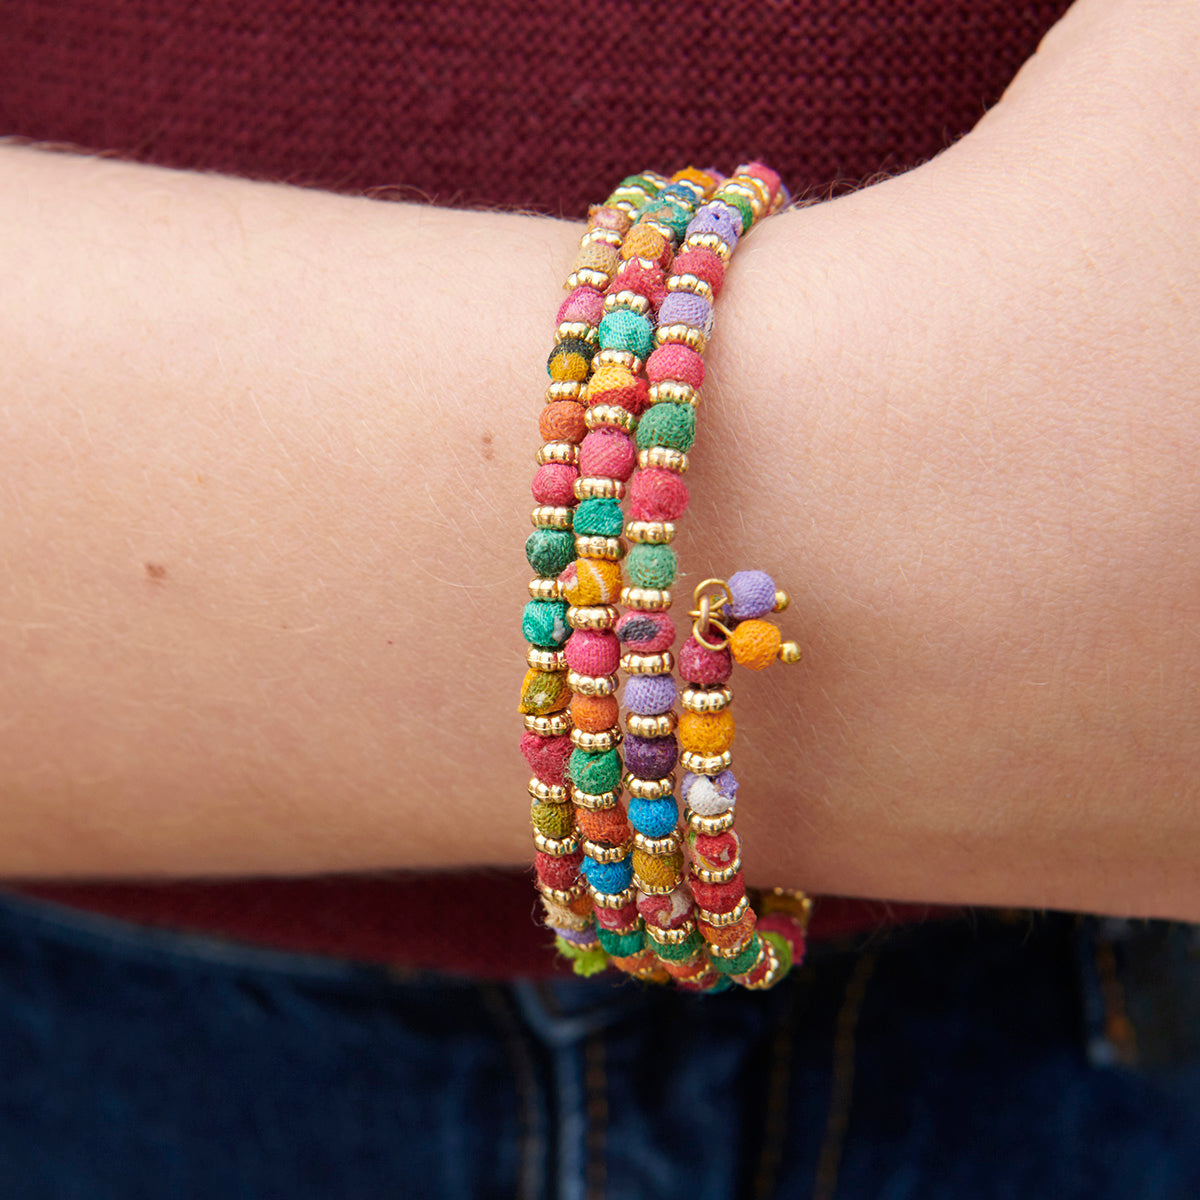 Angelco Accessories mini kantha bead bangle as worn by model in close up view